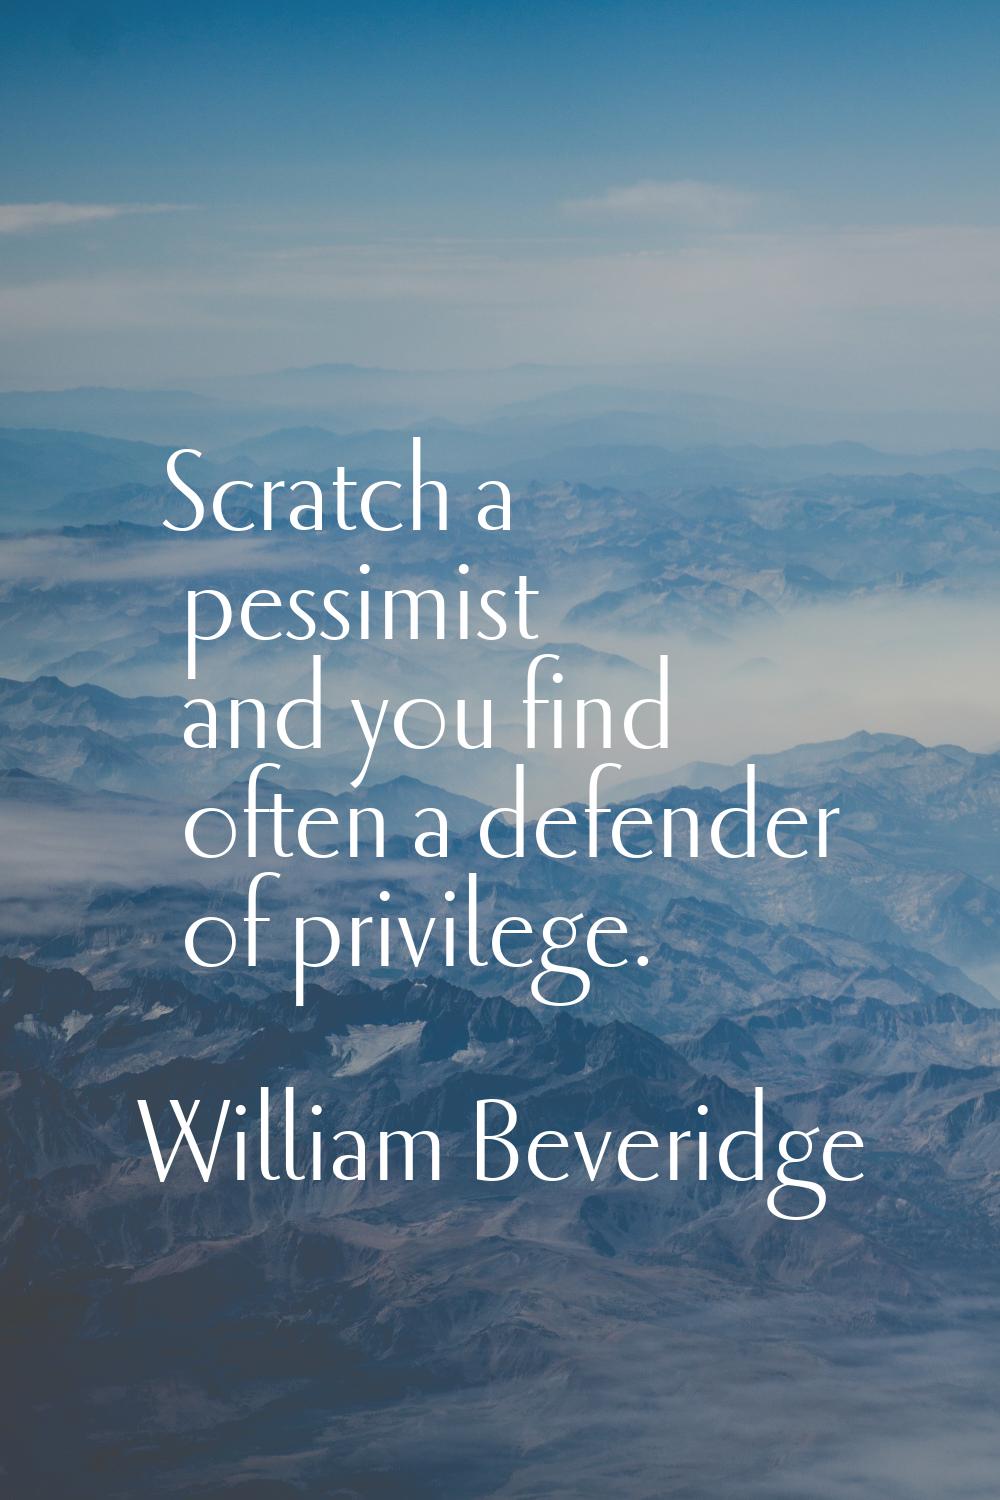 Scratch a pessimist and you find often a defender of privilege.